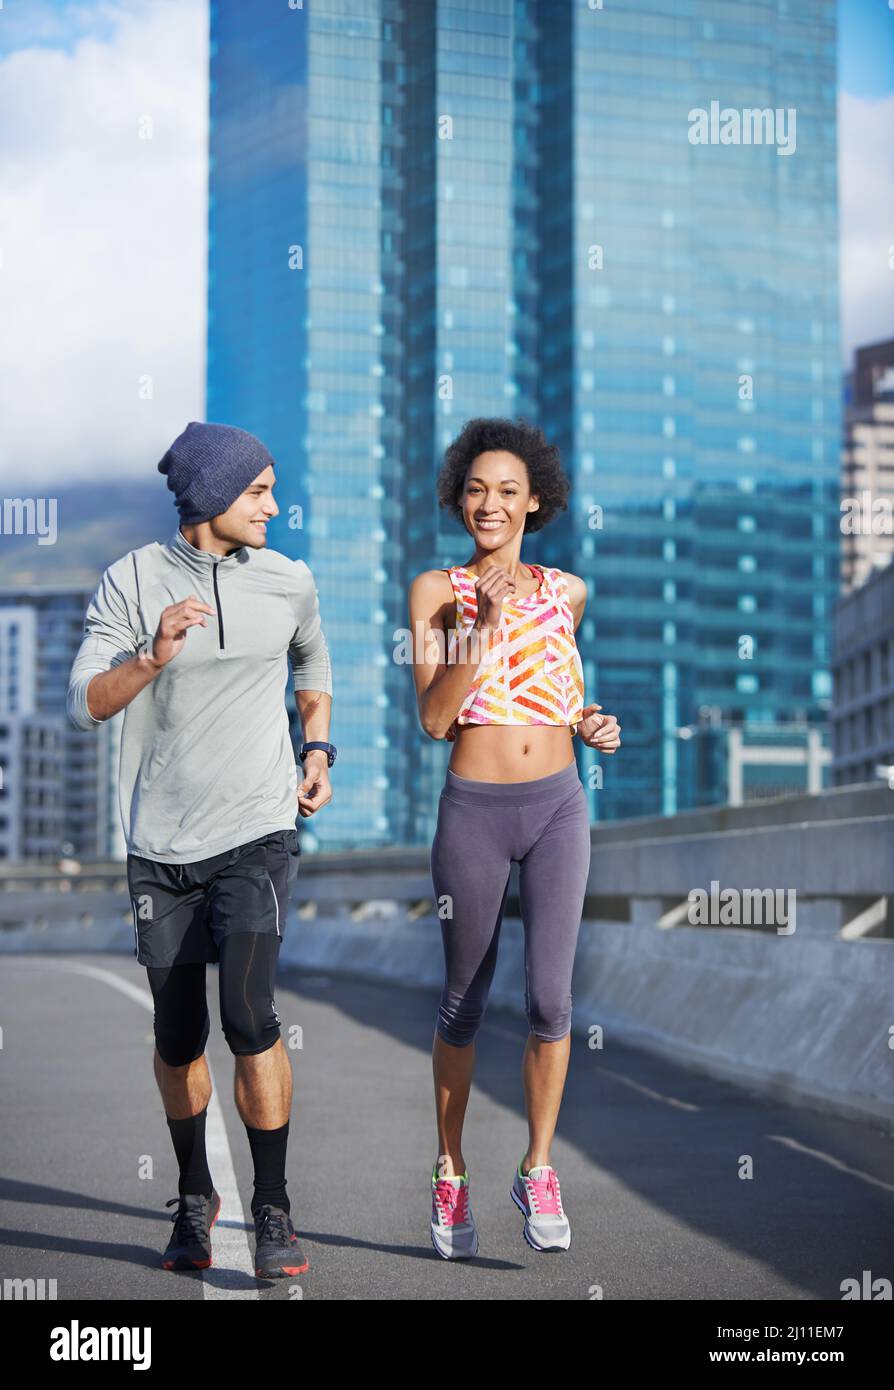 He almost keeps pace with me. Shot of two friends jogging together through the city streets. Stock Photo